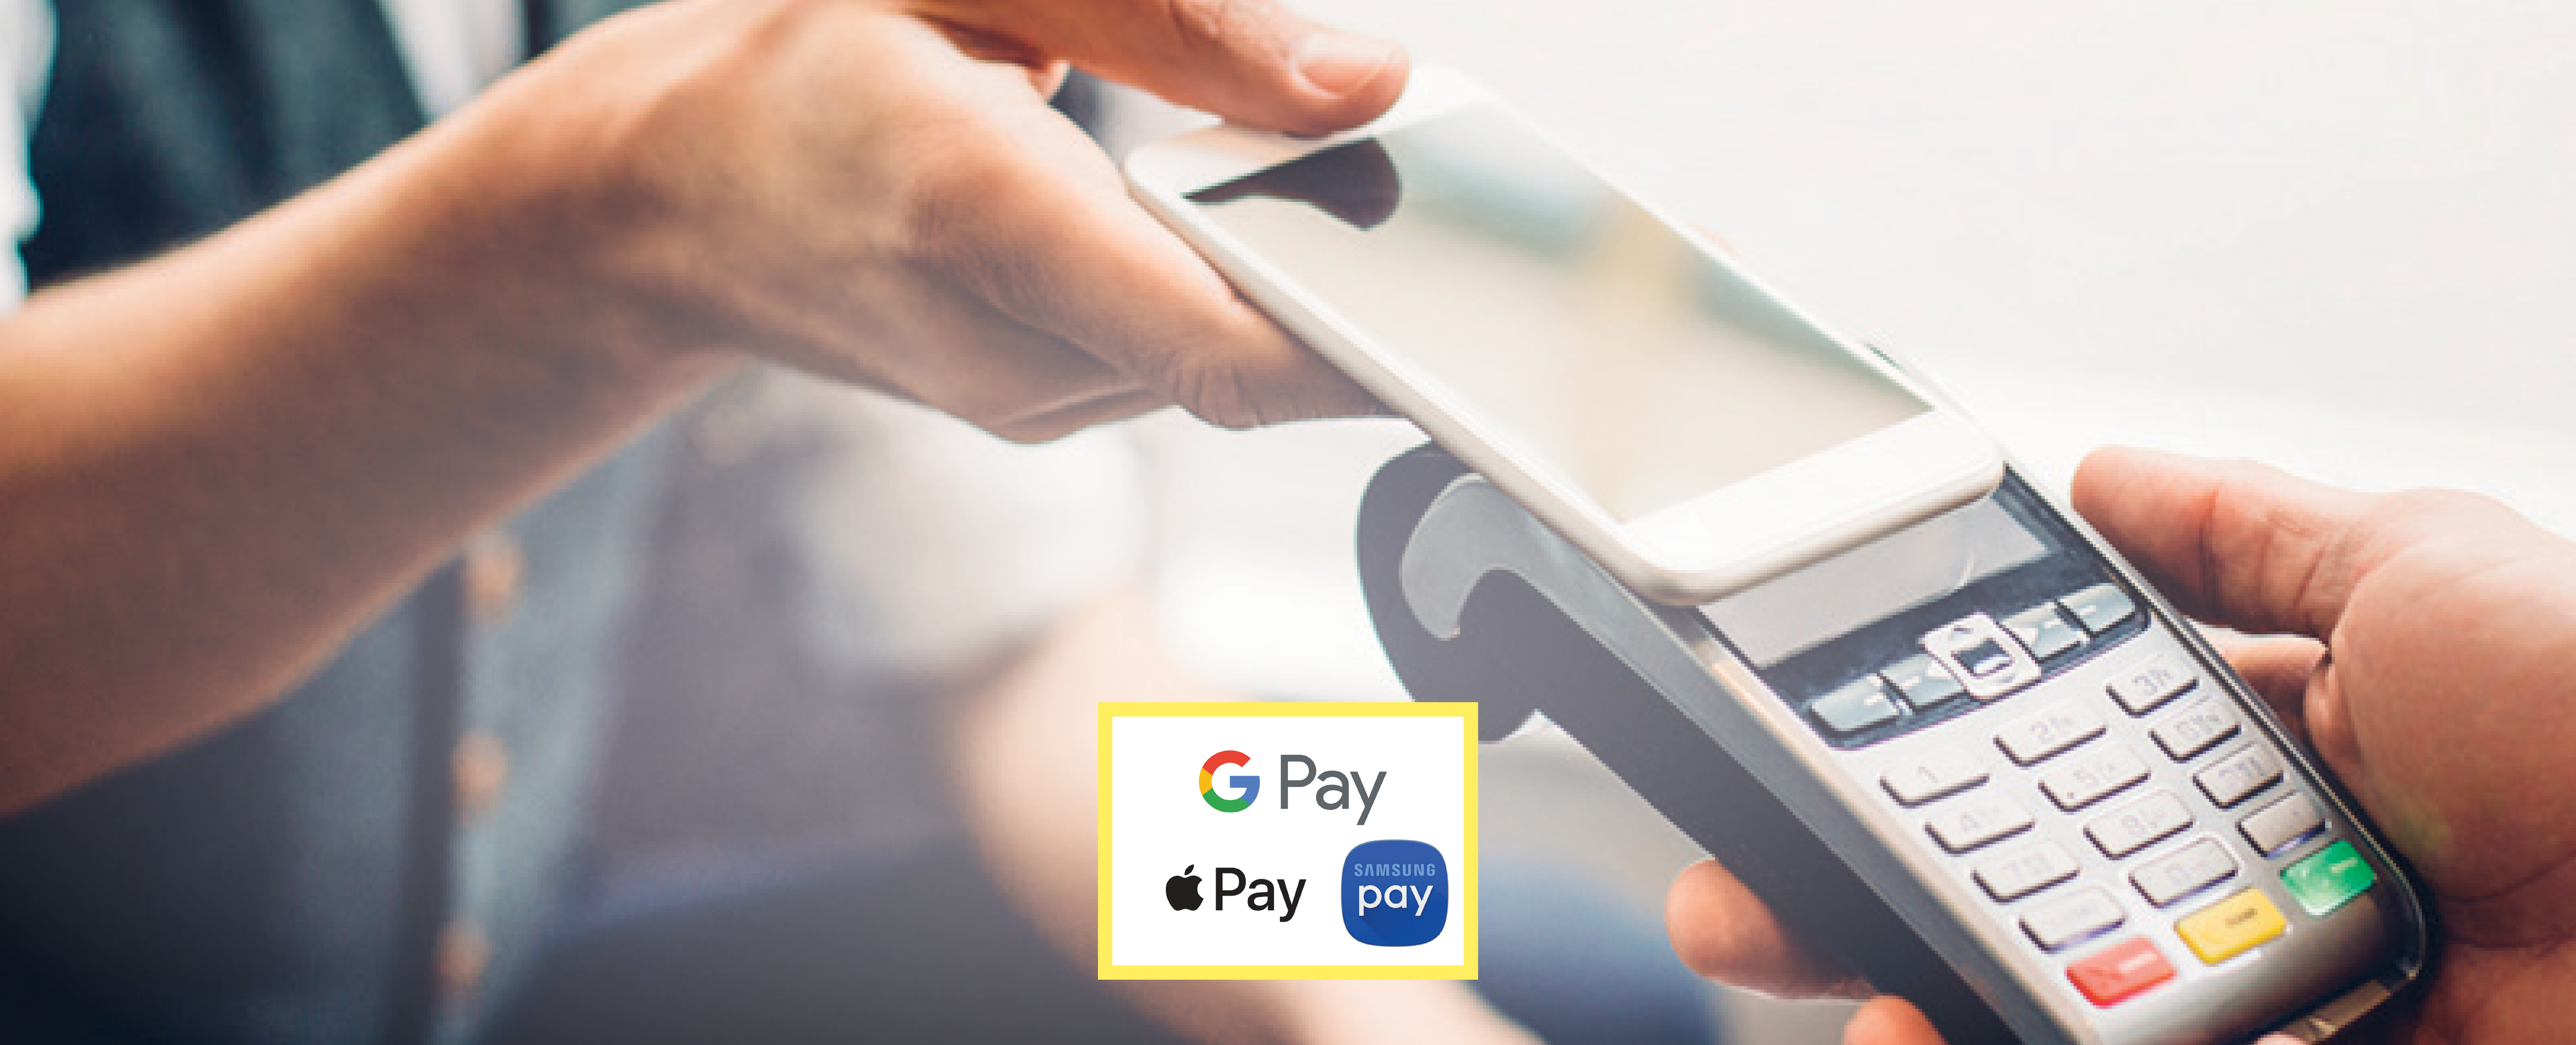 Digital Wallet, Apple Pay, Samsung Pay and Google Pay